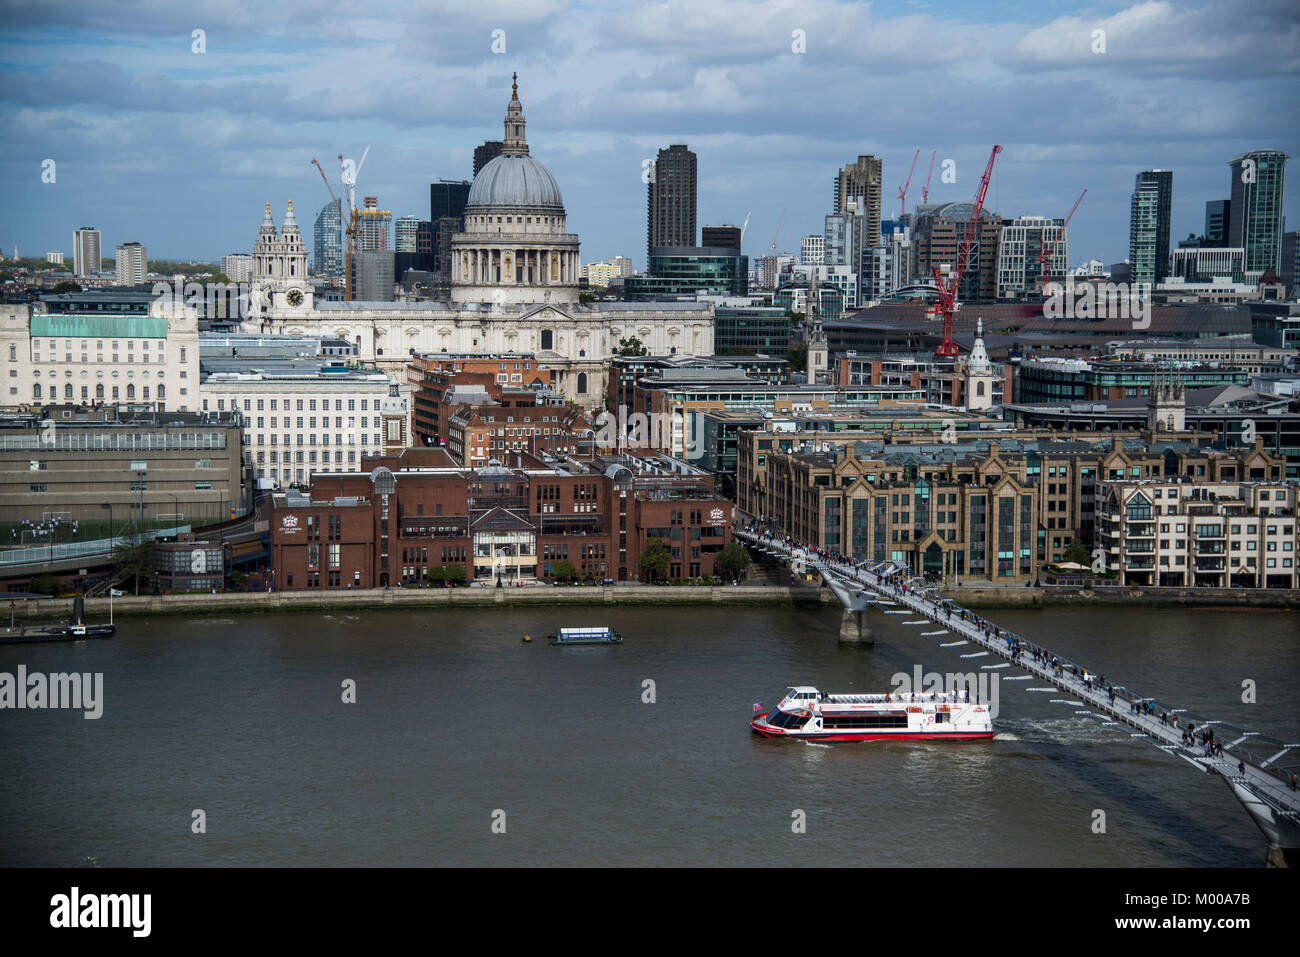 River Thames and St Pauls cathedral seen from the Tate Britain Museum London, 2017 Stock Photo